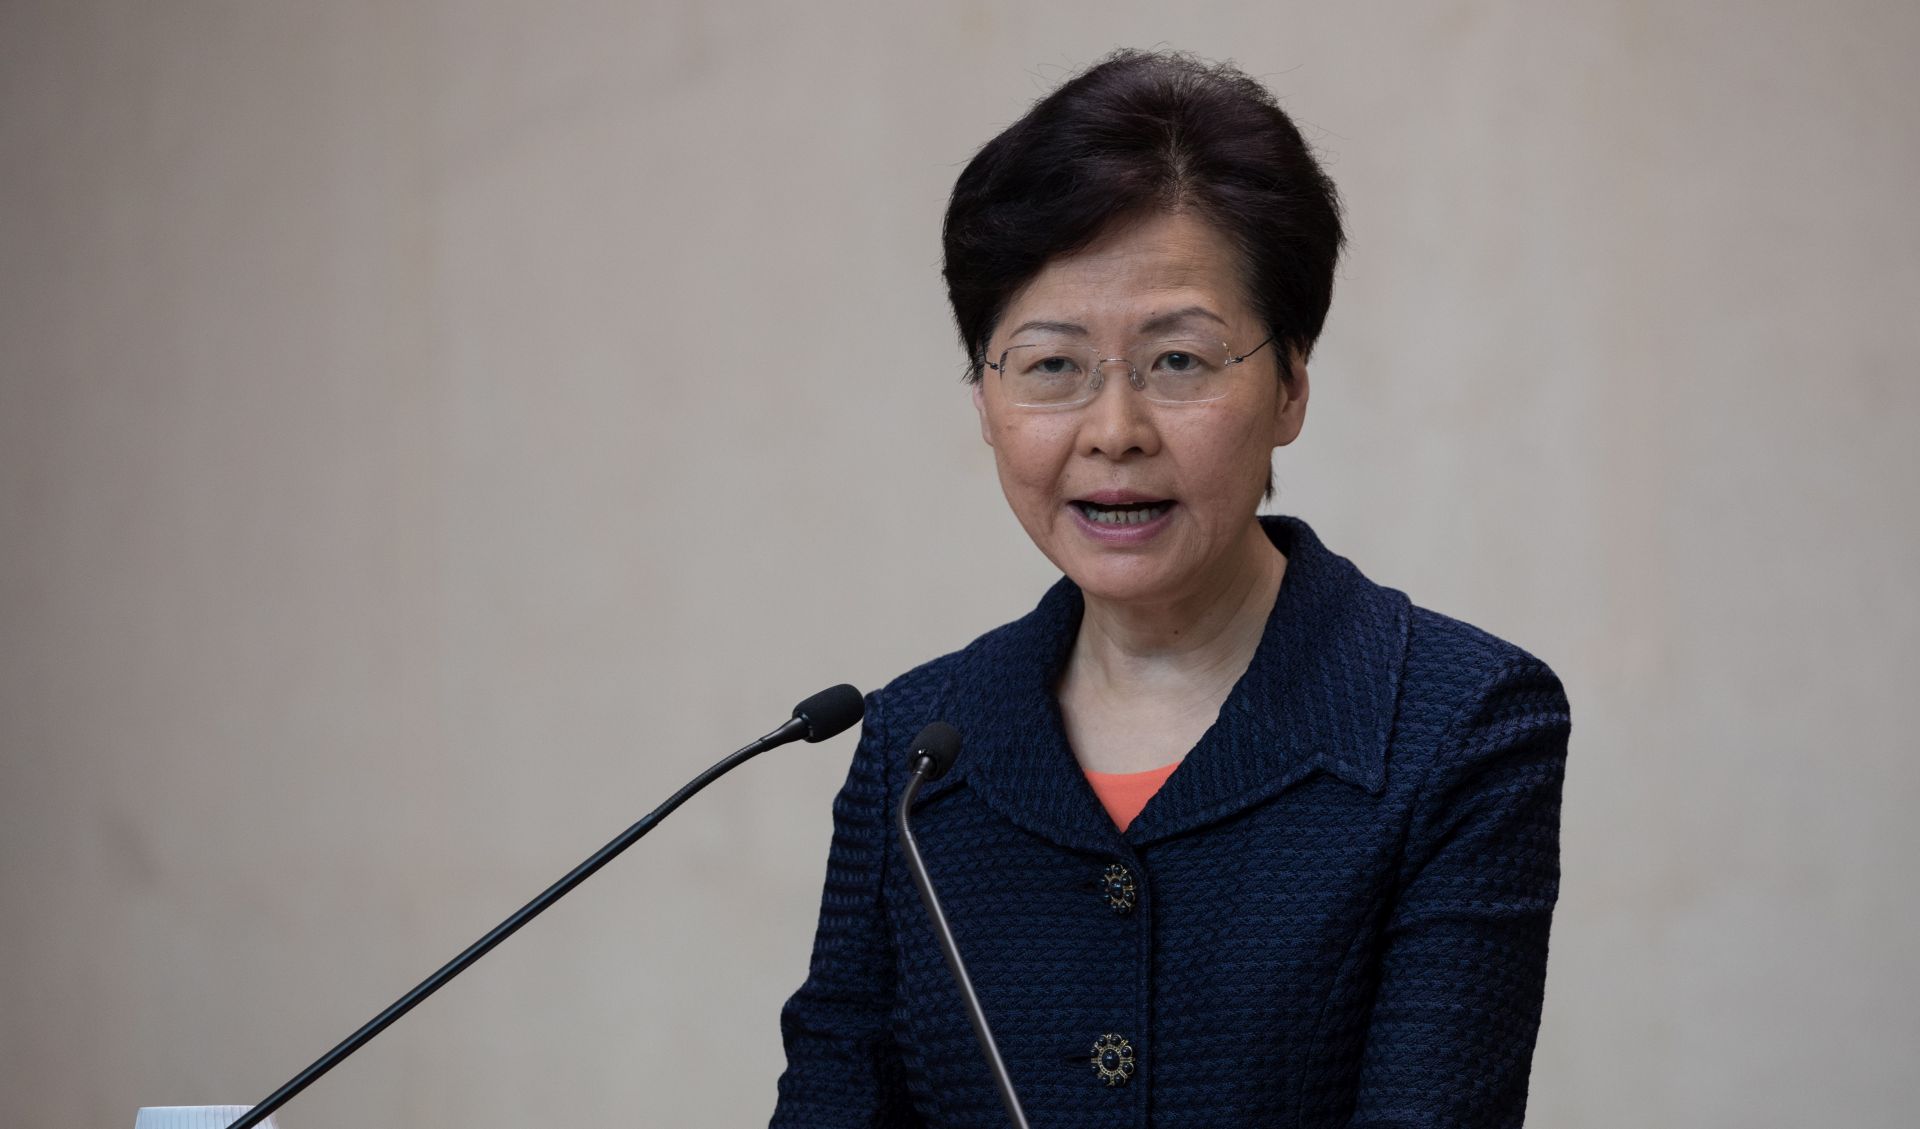 epa07781589 Hong Kong Chief Executive Carrie Lam Cheng Yuet-ngor speaks during a media briefing before the weekly executive council meeting in Hong Kong, China, 20 August 2019. Lam said her administration would immediately work on setting up a means of finding a solution to the civil unrest triggered by her massively unpopular extradition bill.  EPA/JEROME FAVRE